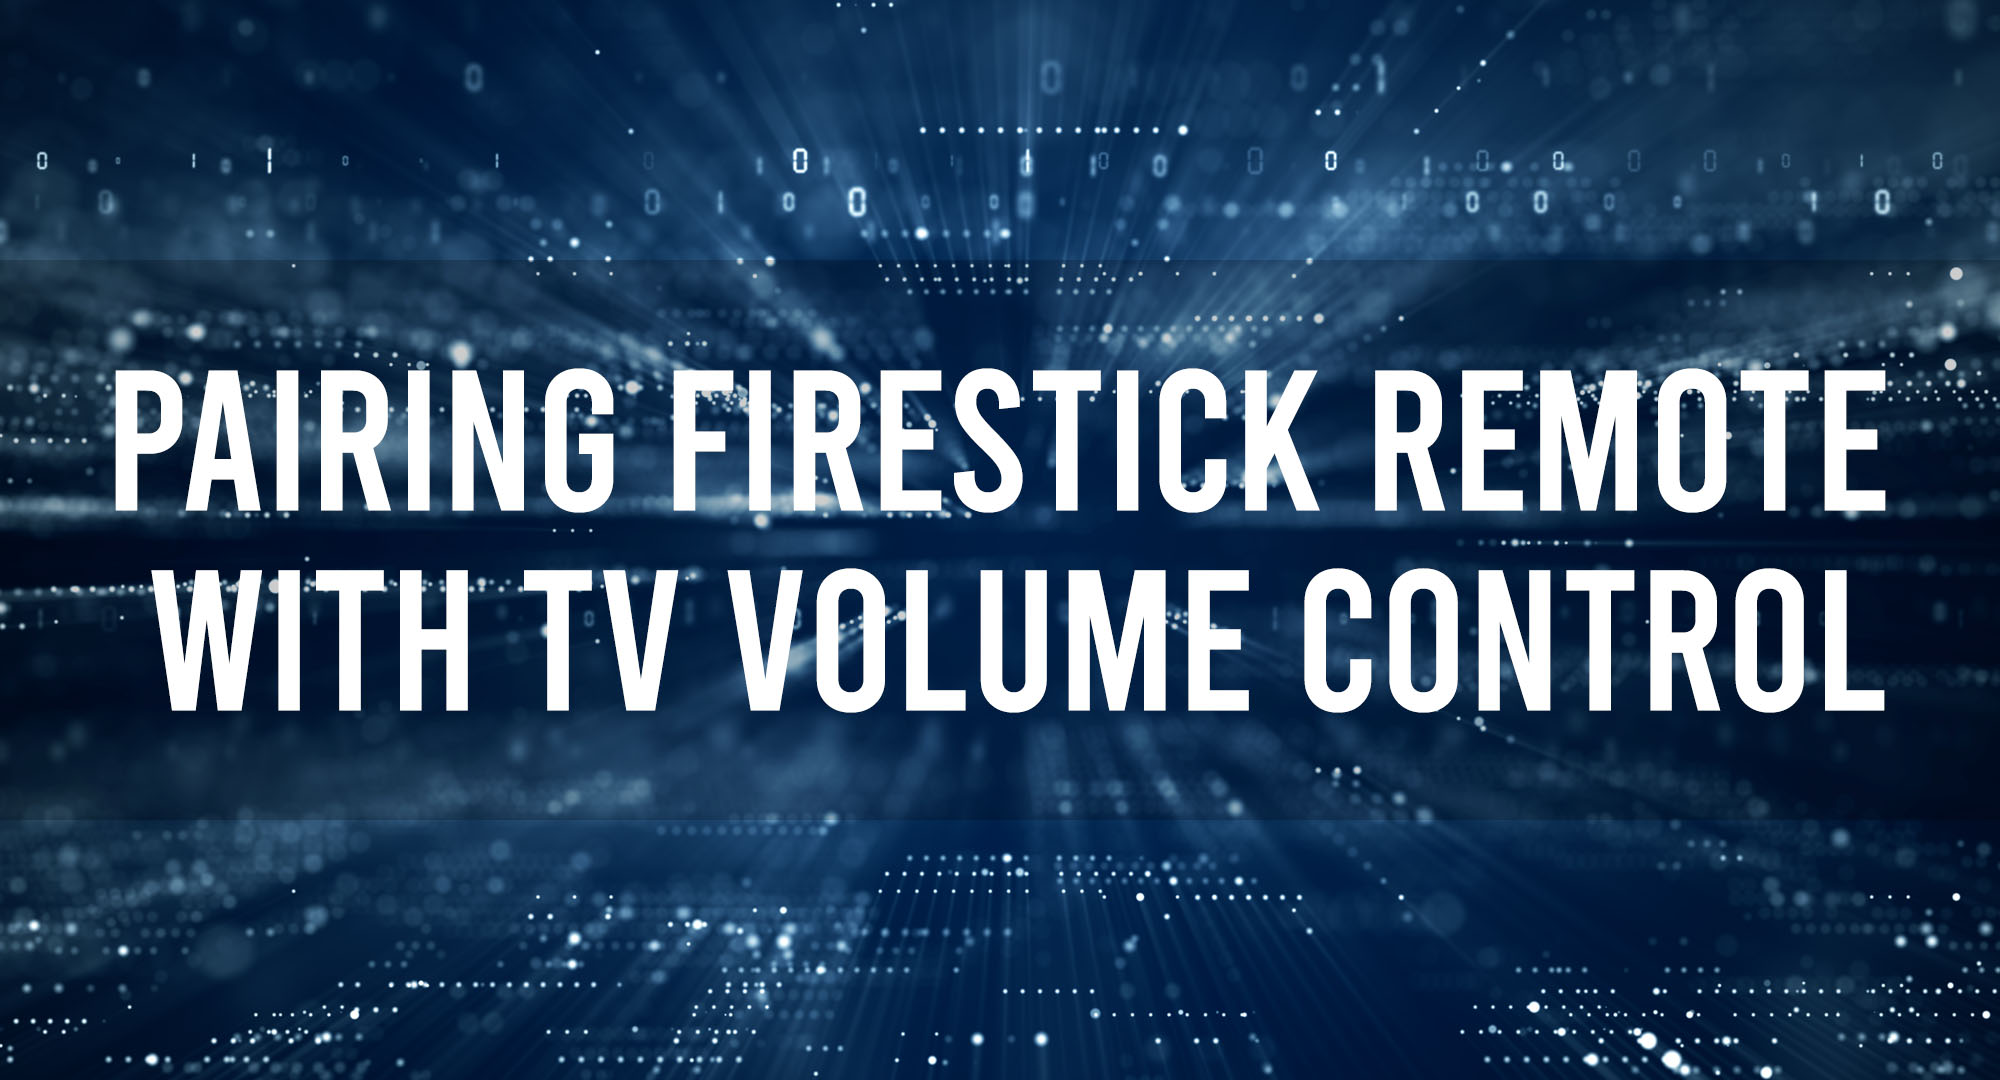 Pairing Firestick Remote with TV Volume Control